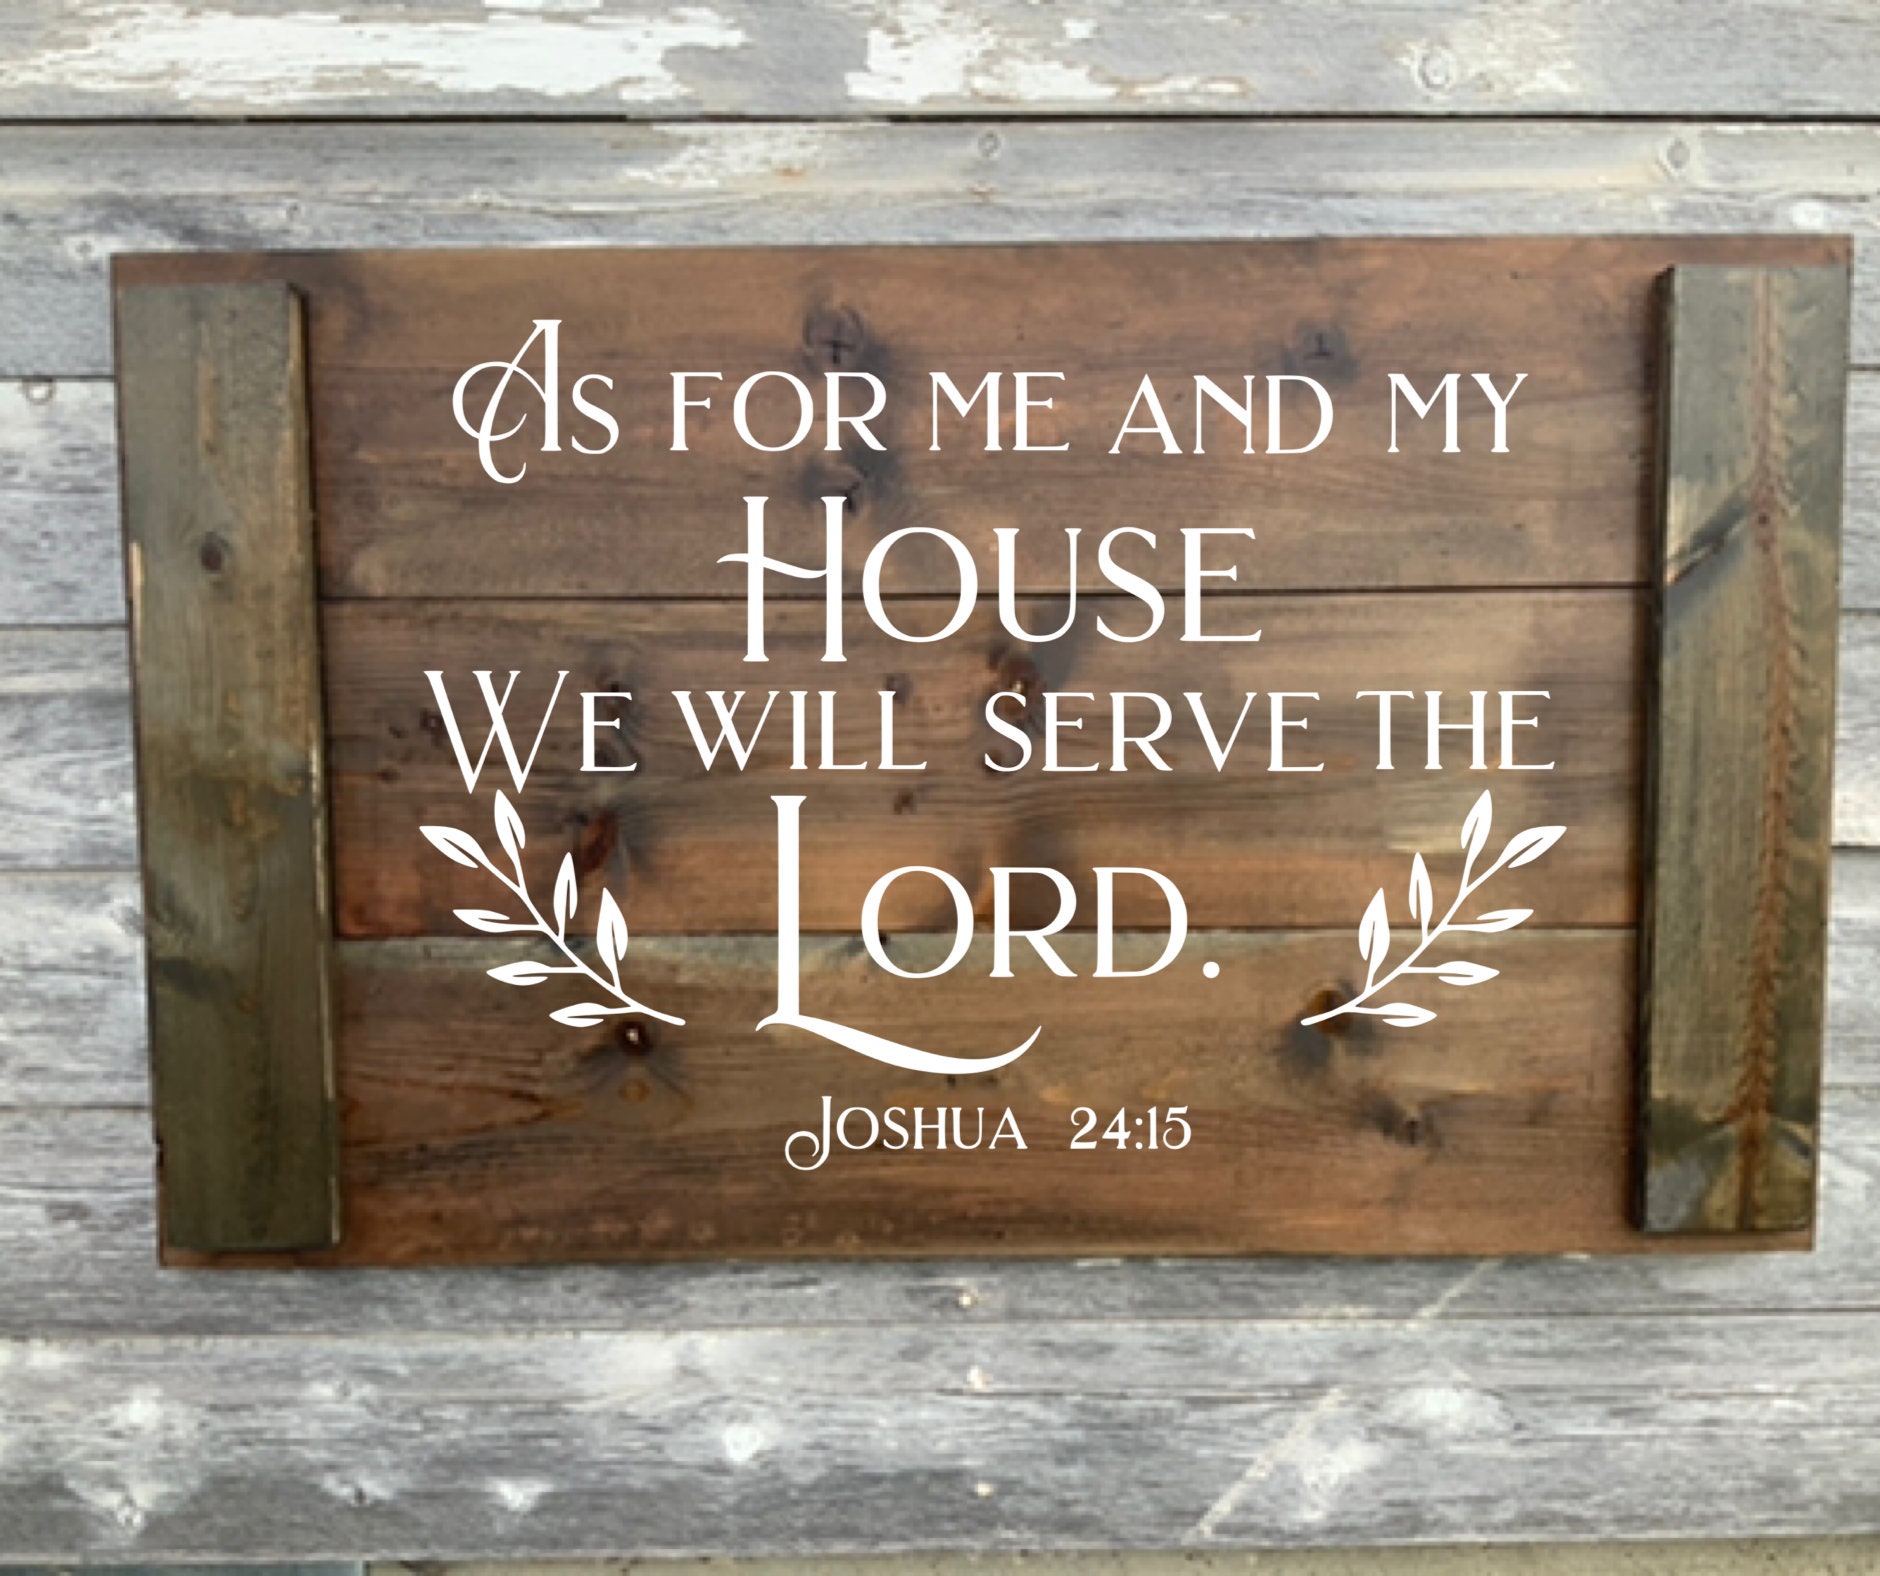 As for me and my house, we will serve the Lord, Joshua 24:15, Bible ...